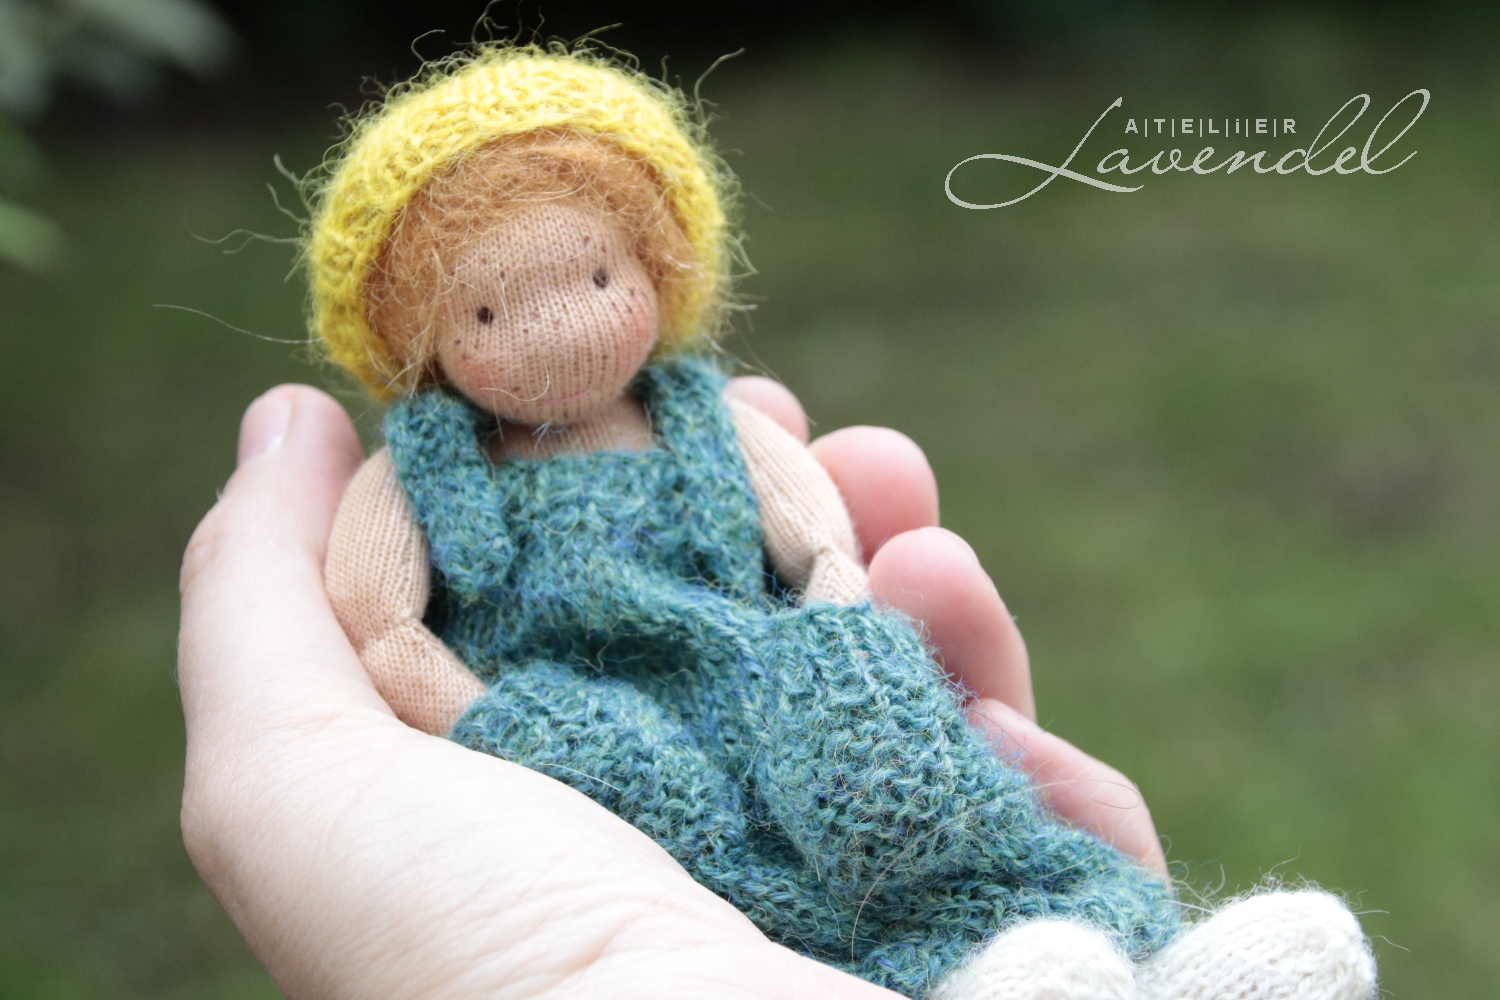 Atelier Lavendel Dolls: Waldorf Doll Seminar 2018 in Elspeet, the Netherlands, has passed as a firework of all kinds of beautiful impressions around the doll art and Waldorf doll making.